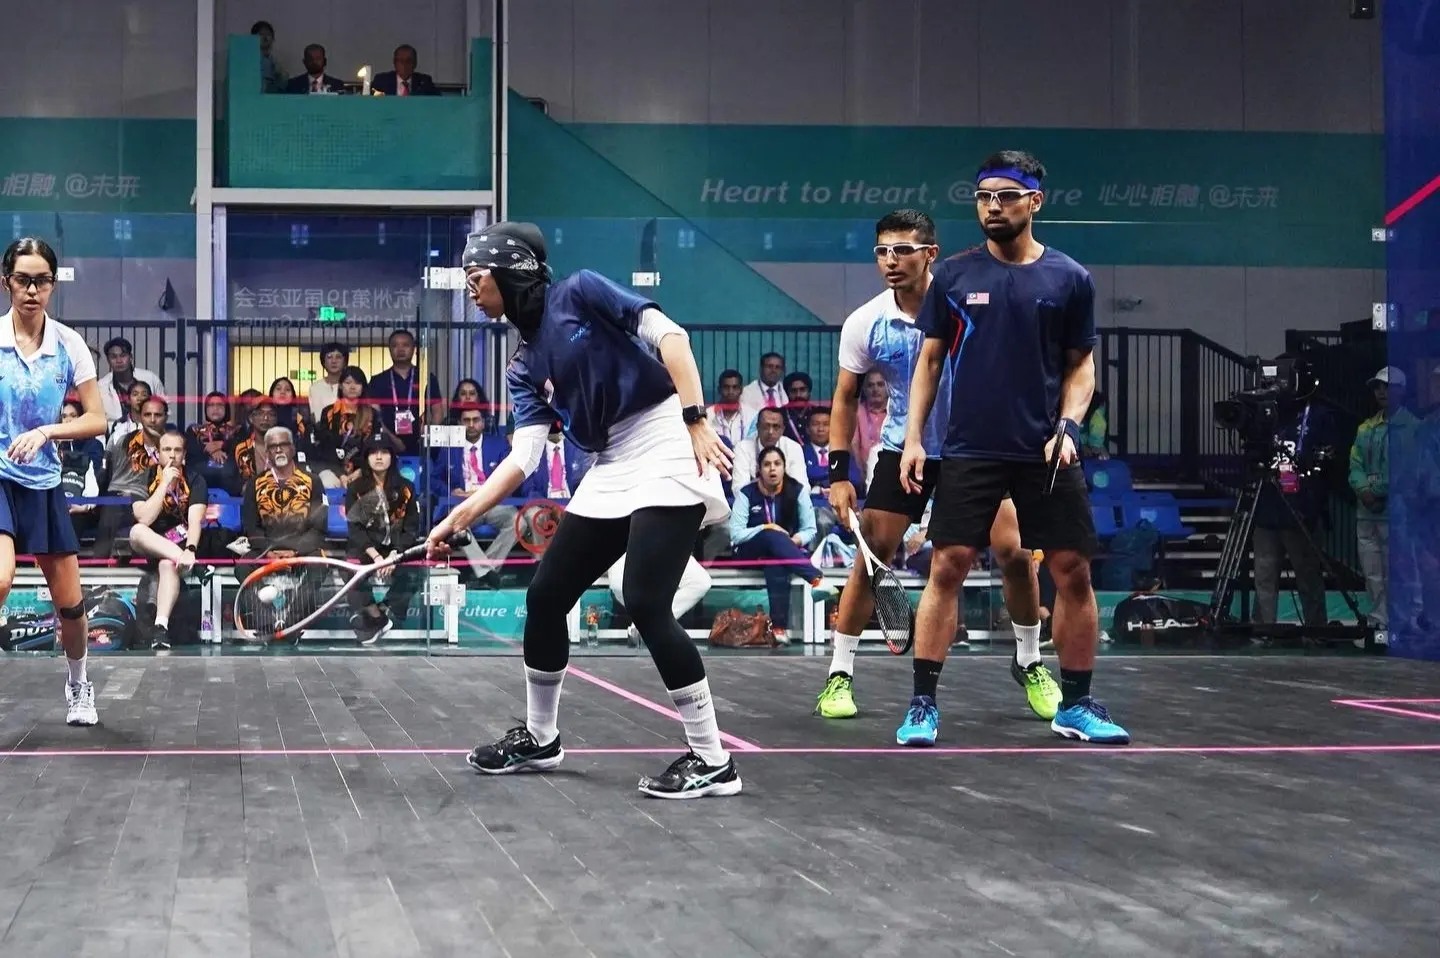 SRAM gladly welcomes squash’s 2028 Olympics debut after years of pursuing inclusion